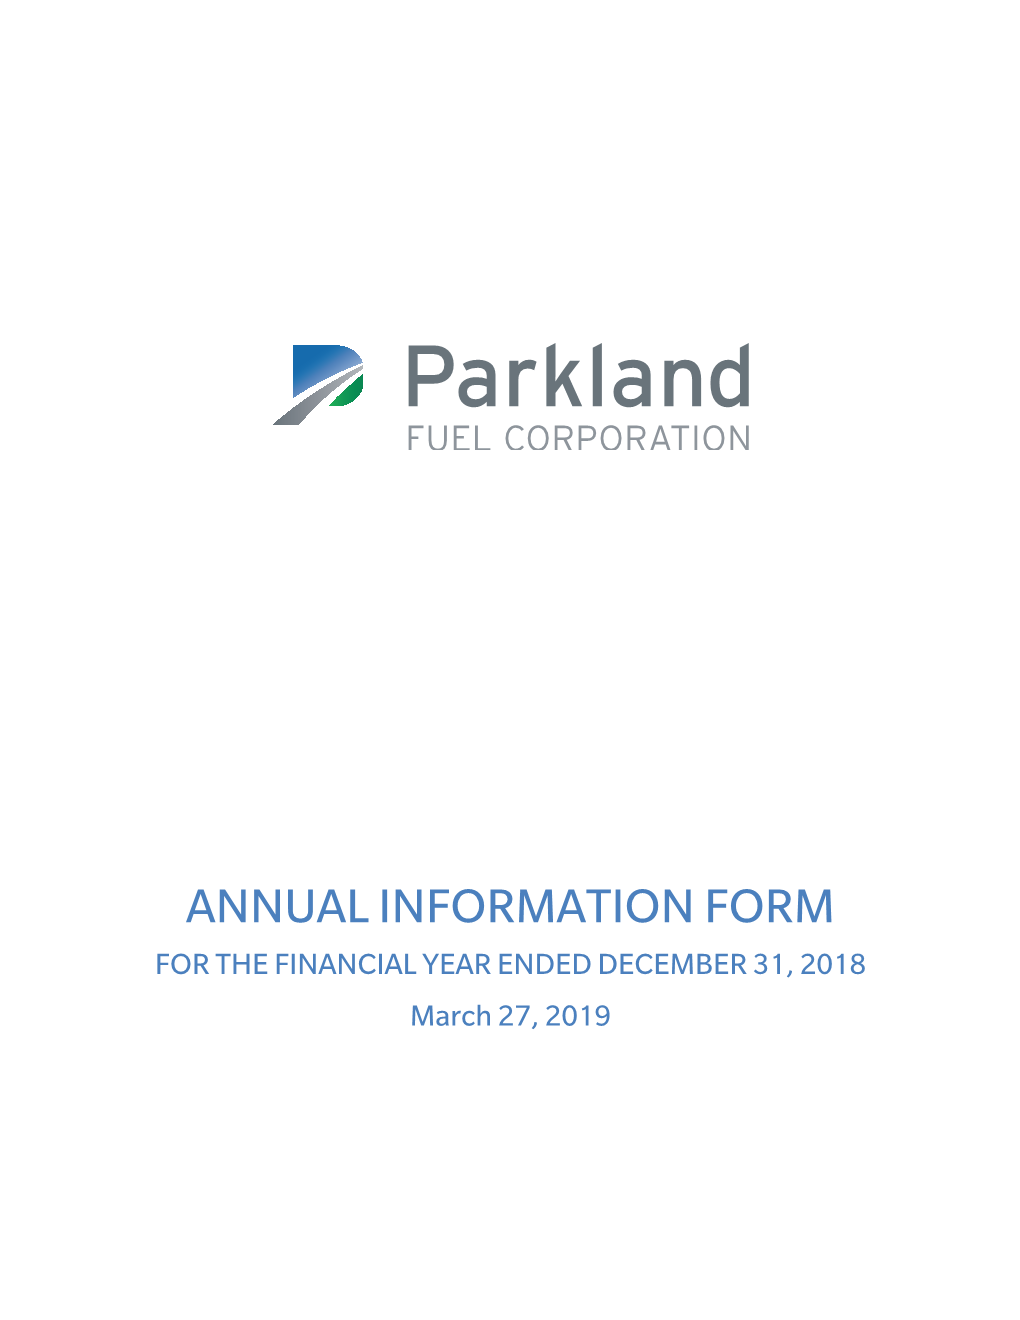 ANNUAL INFORMATION FORM for the FINANCIAL YEAR ENDED DECEMBER 31, 2018 March 27, 2019 TABLE of CONTENTS GLOSSARY of TERMS